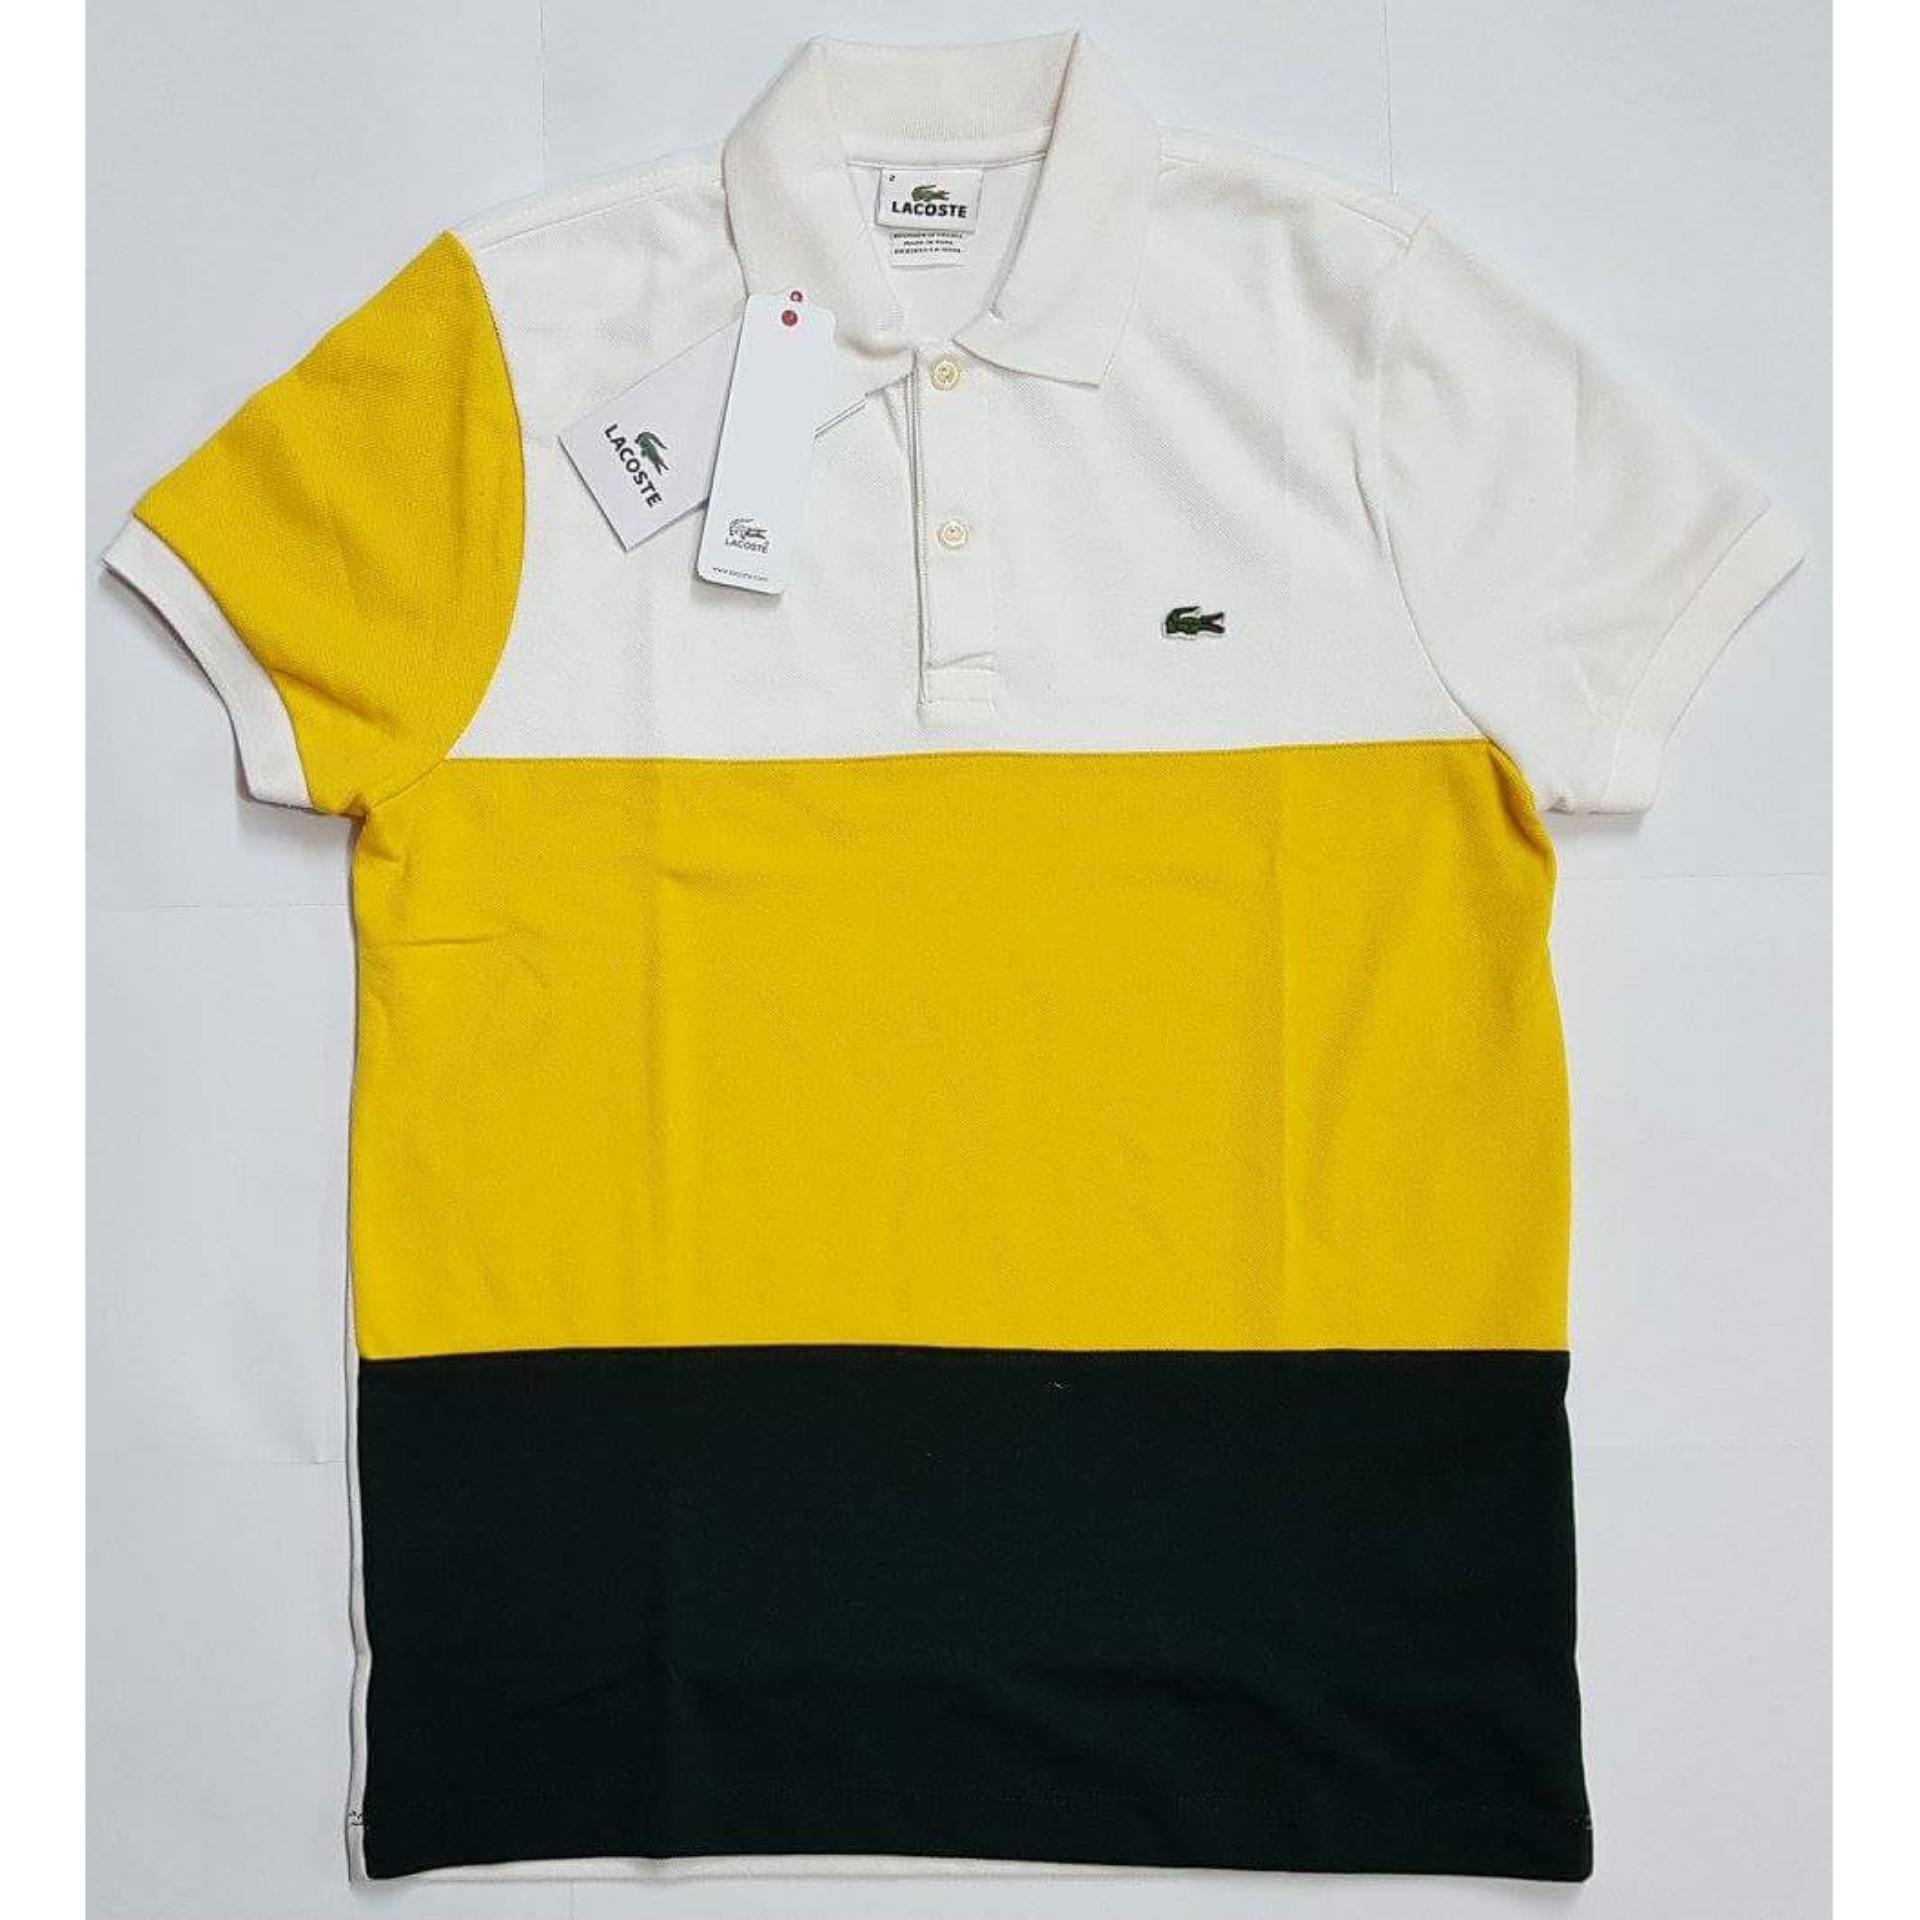 Lacoste Polo Shirts Price Philippines - Prism Contractors & Engineers